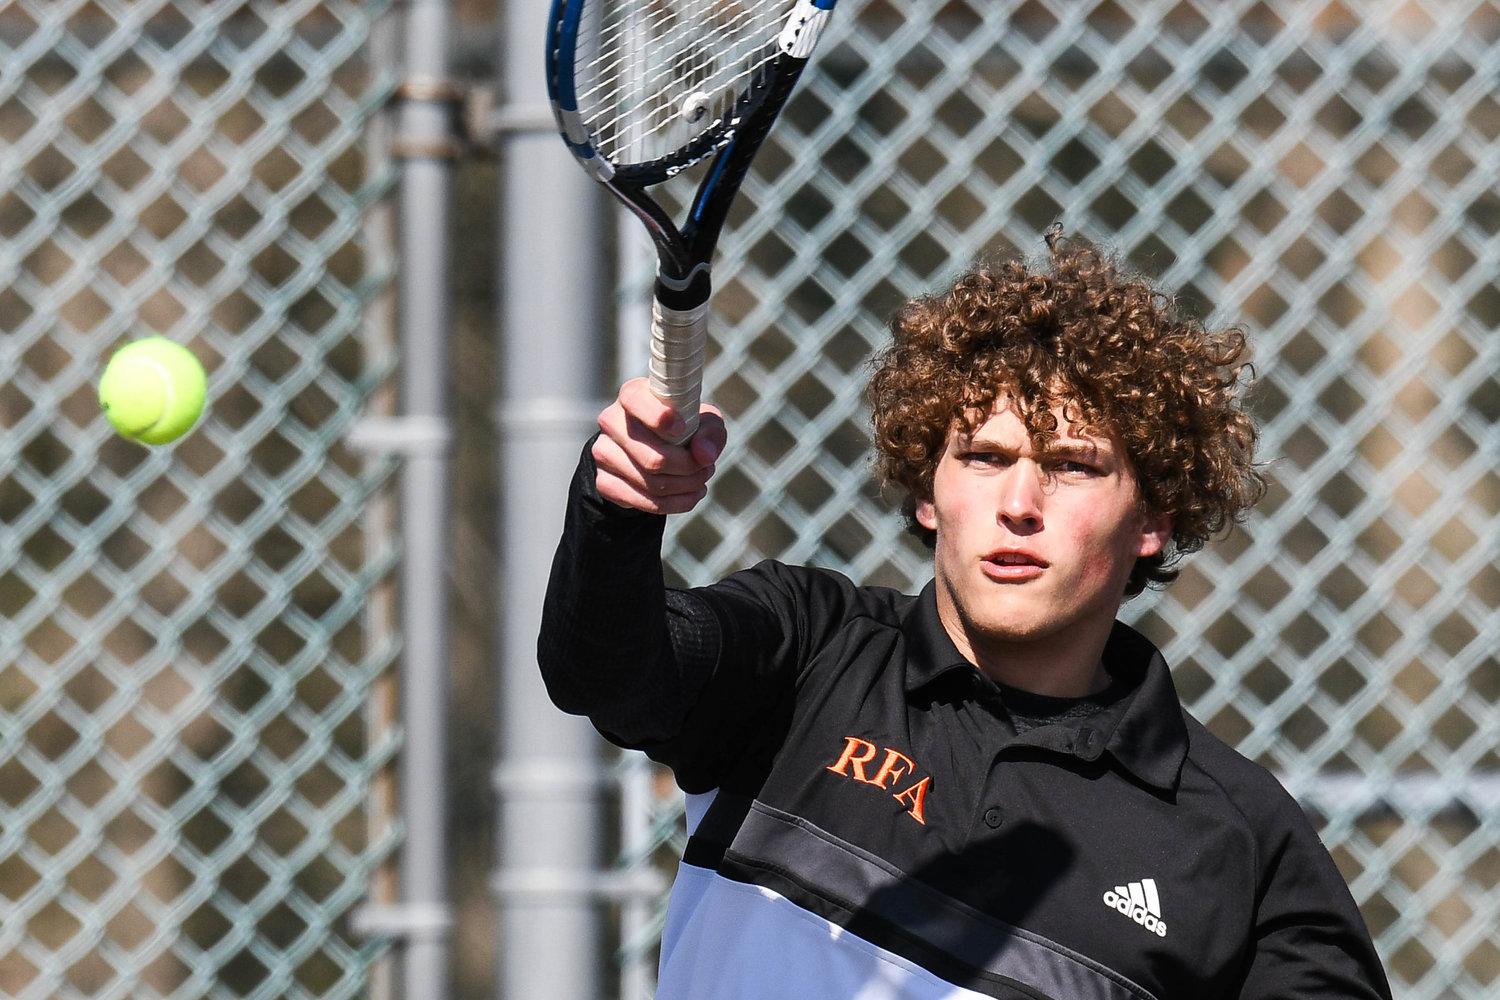 SMASH HIT — RFA’s Philip Pociecha competes during a match against CVA on Thursday on the road in Tri-Valley League play. Pociecha won the first singles match and RFA swept the contest 5-0.